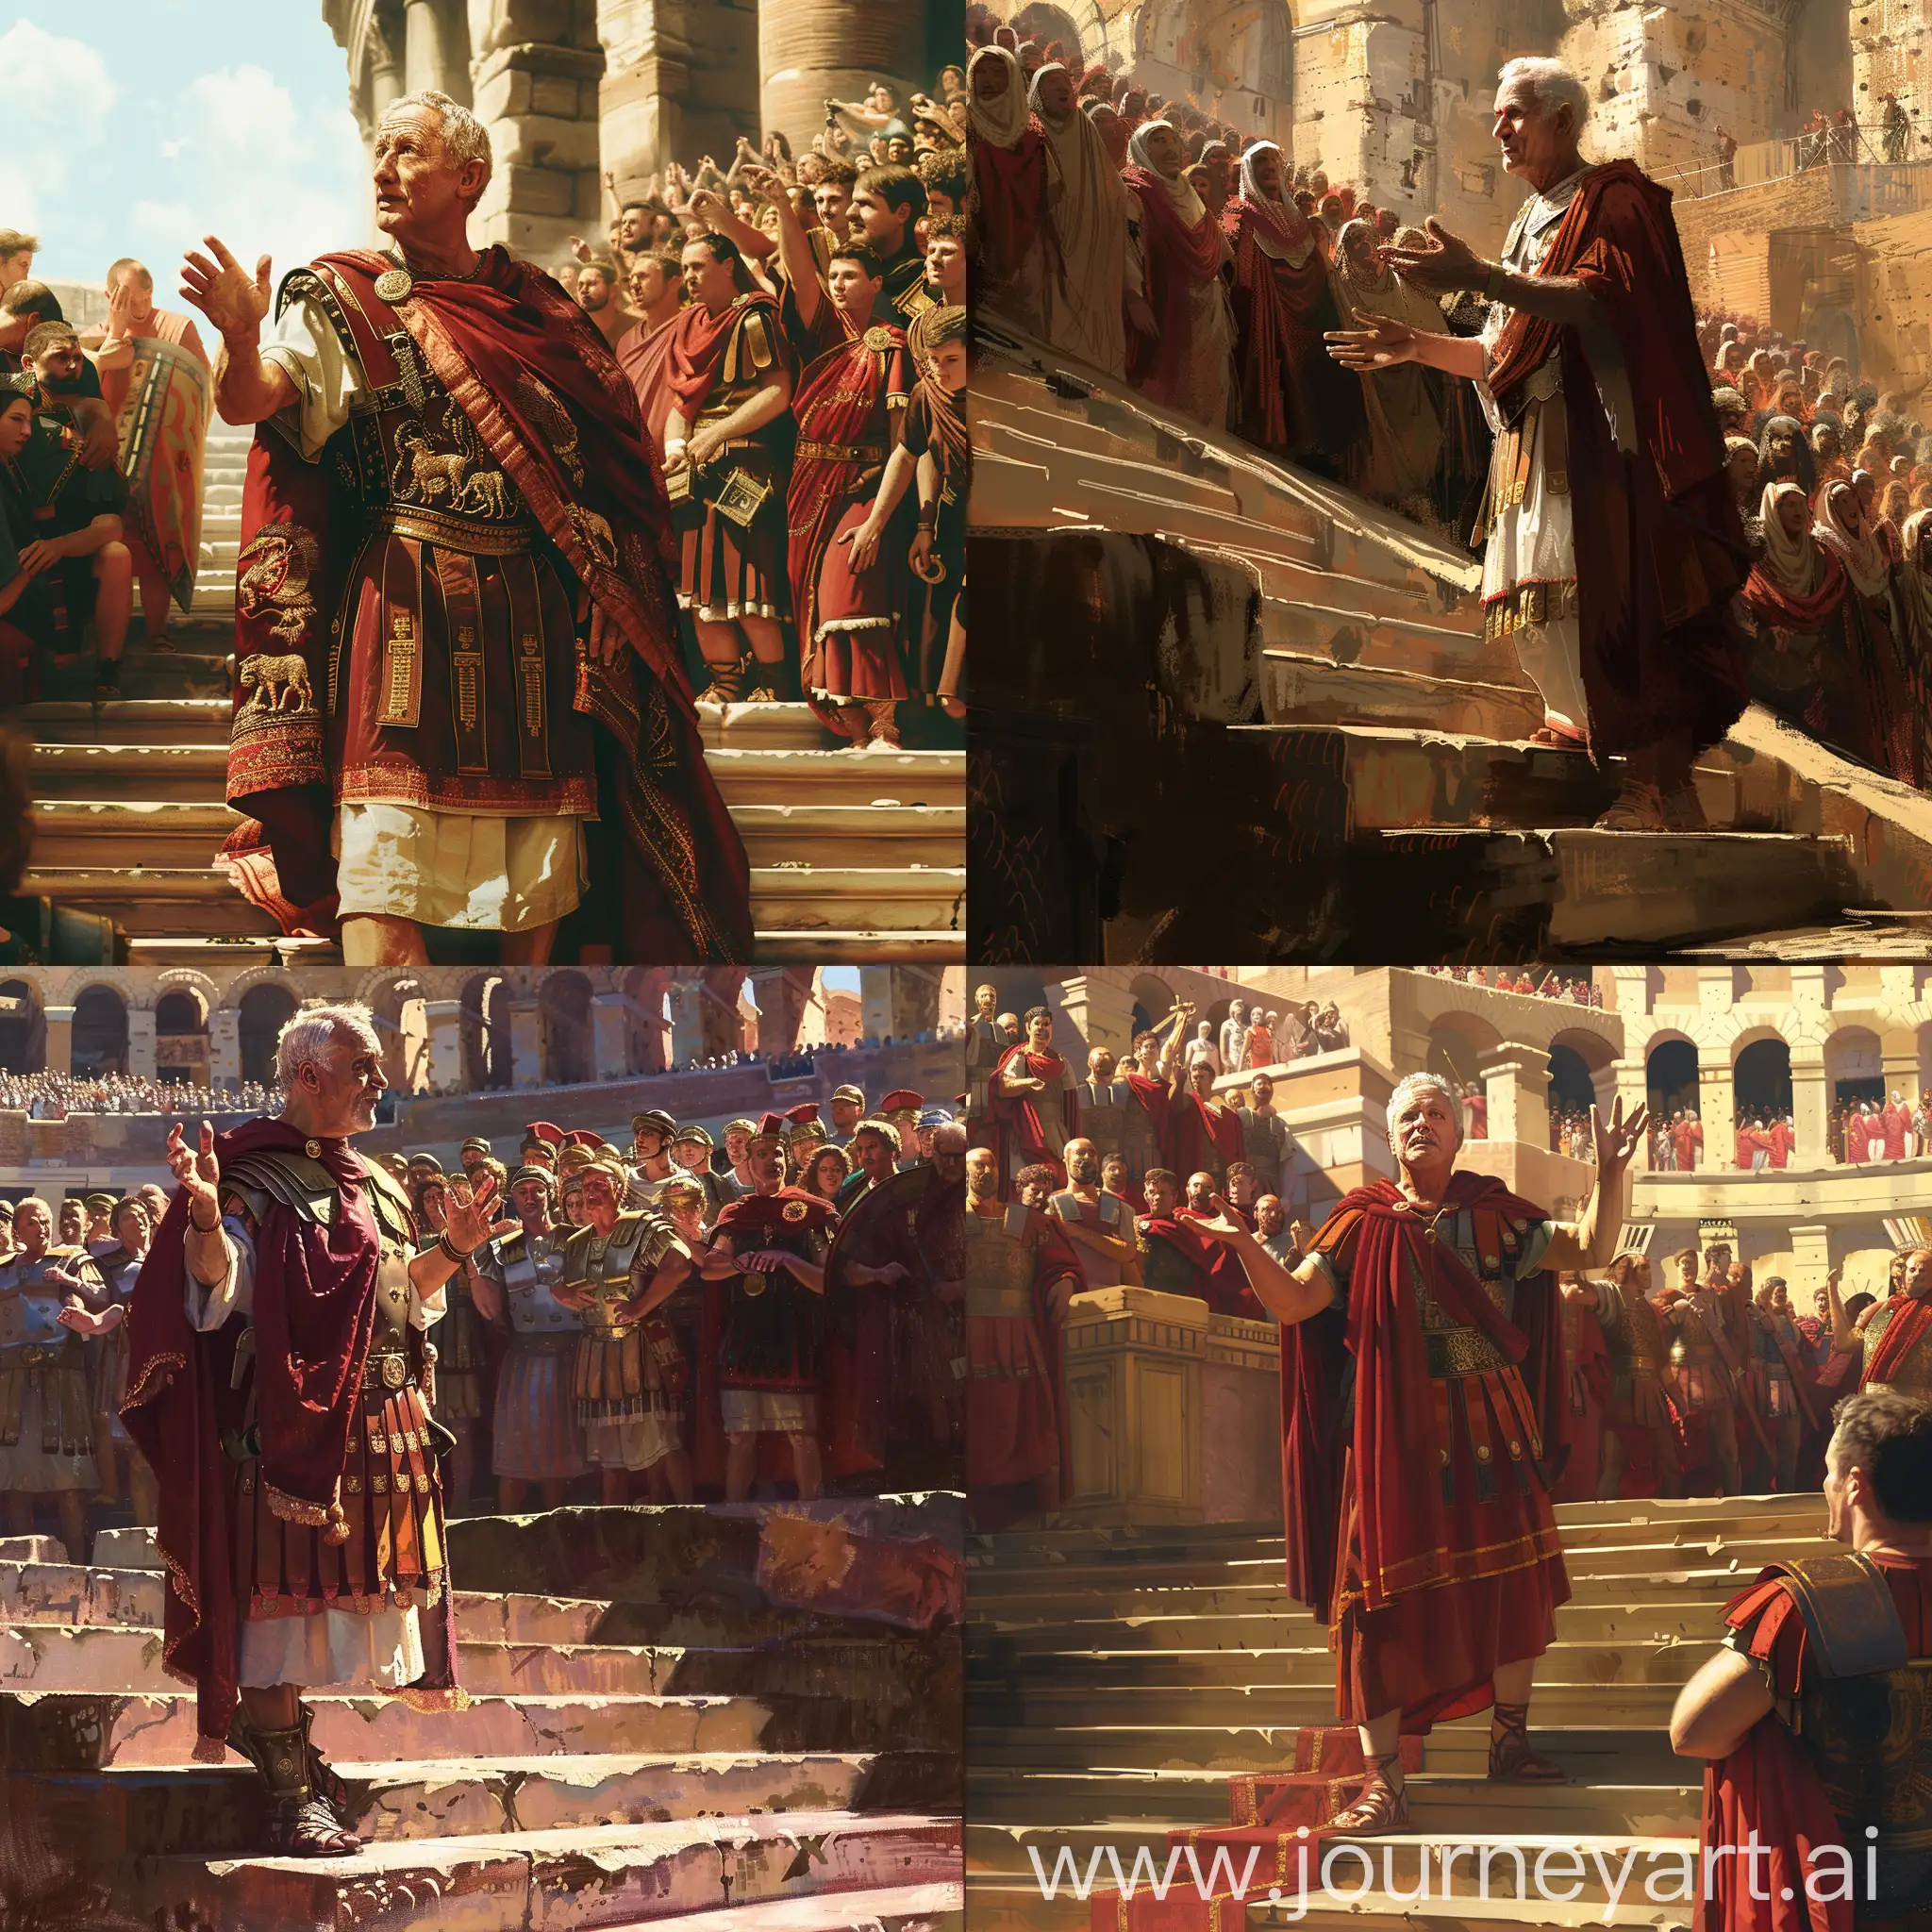 a vivid visual portrayal: an aged Roman ruler on the Colosseum stairs, addressing a jubilant audience. Portray the majesty and might of the Roman Empire, infusing your artistic vision into this historic moment.